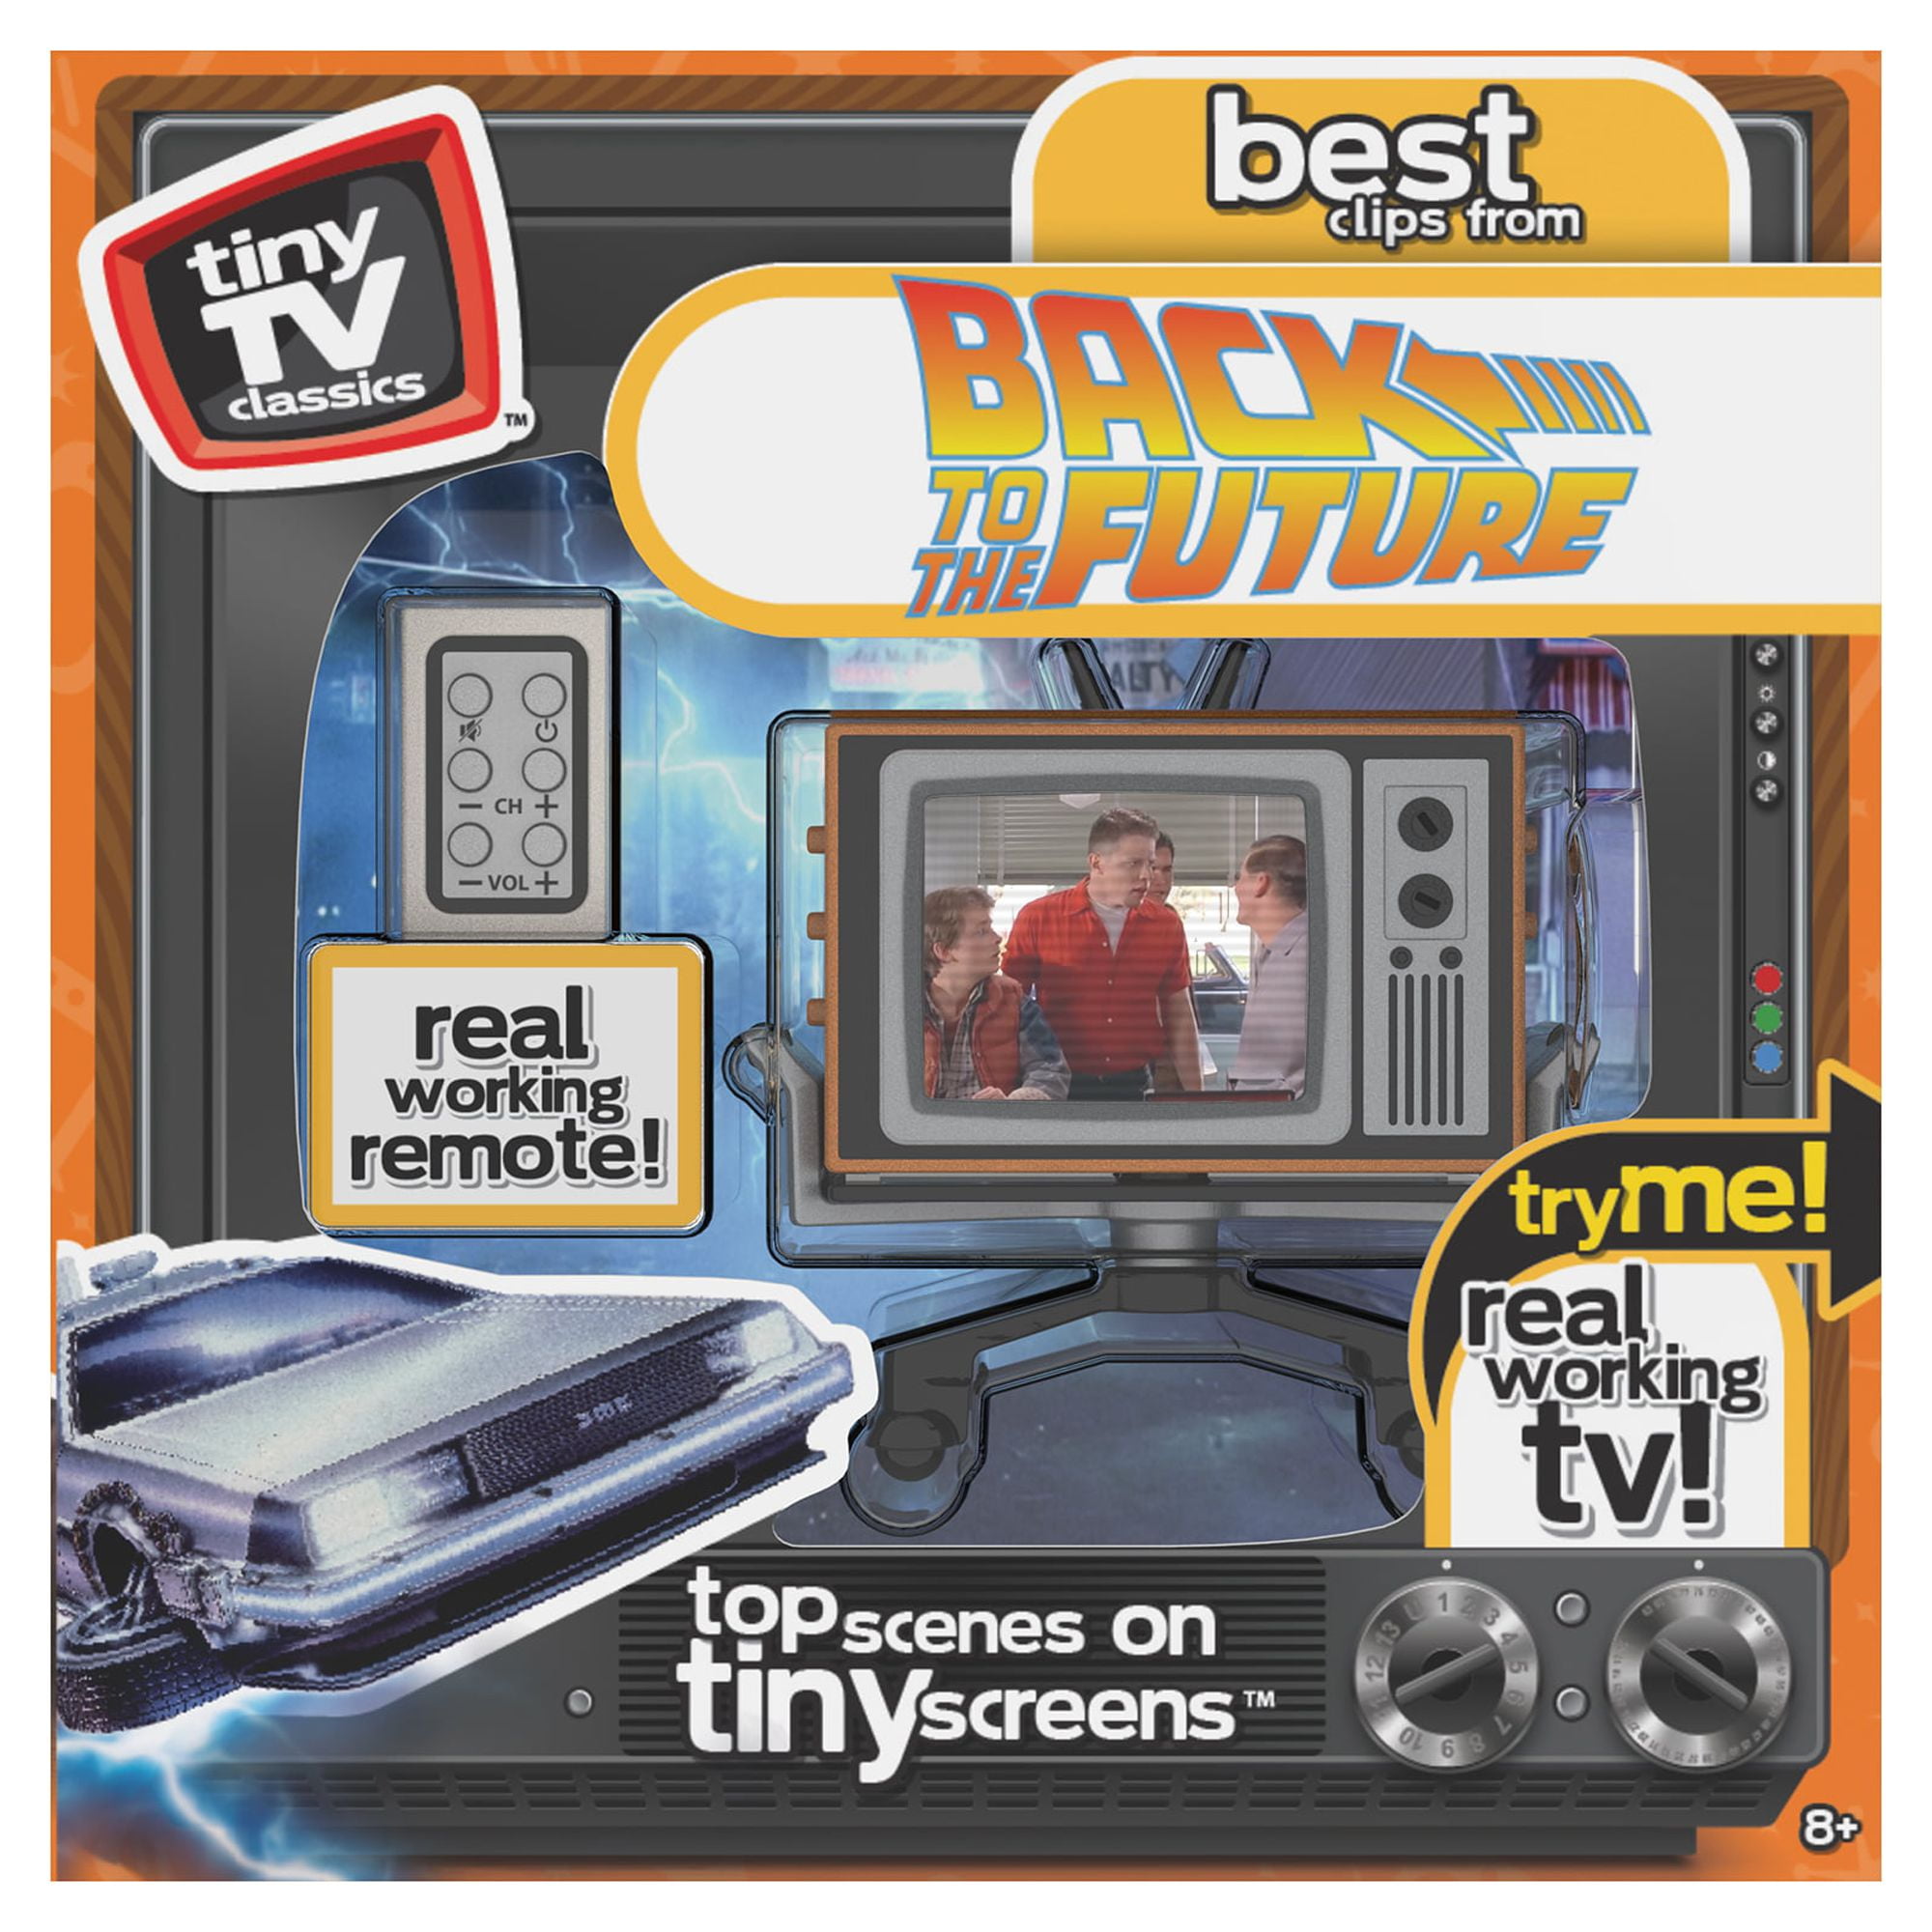 NEW FALL '21 - Tiny TV Classics - Back to the Future Edition- Newest  Collectible from Basic Fun - Watch top Back to the Future original movie  scenes on a real-working Tiny TV (with working remote)! 